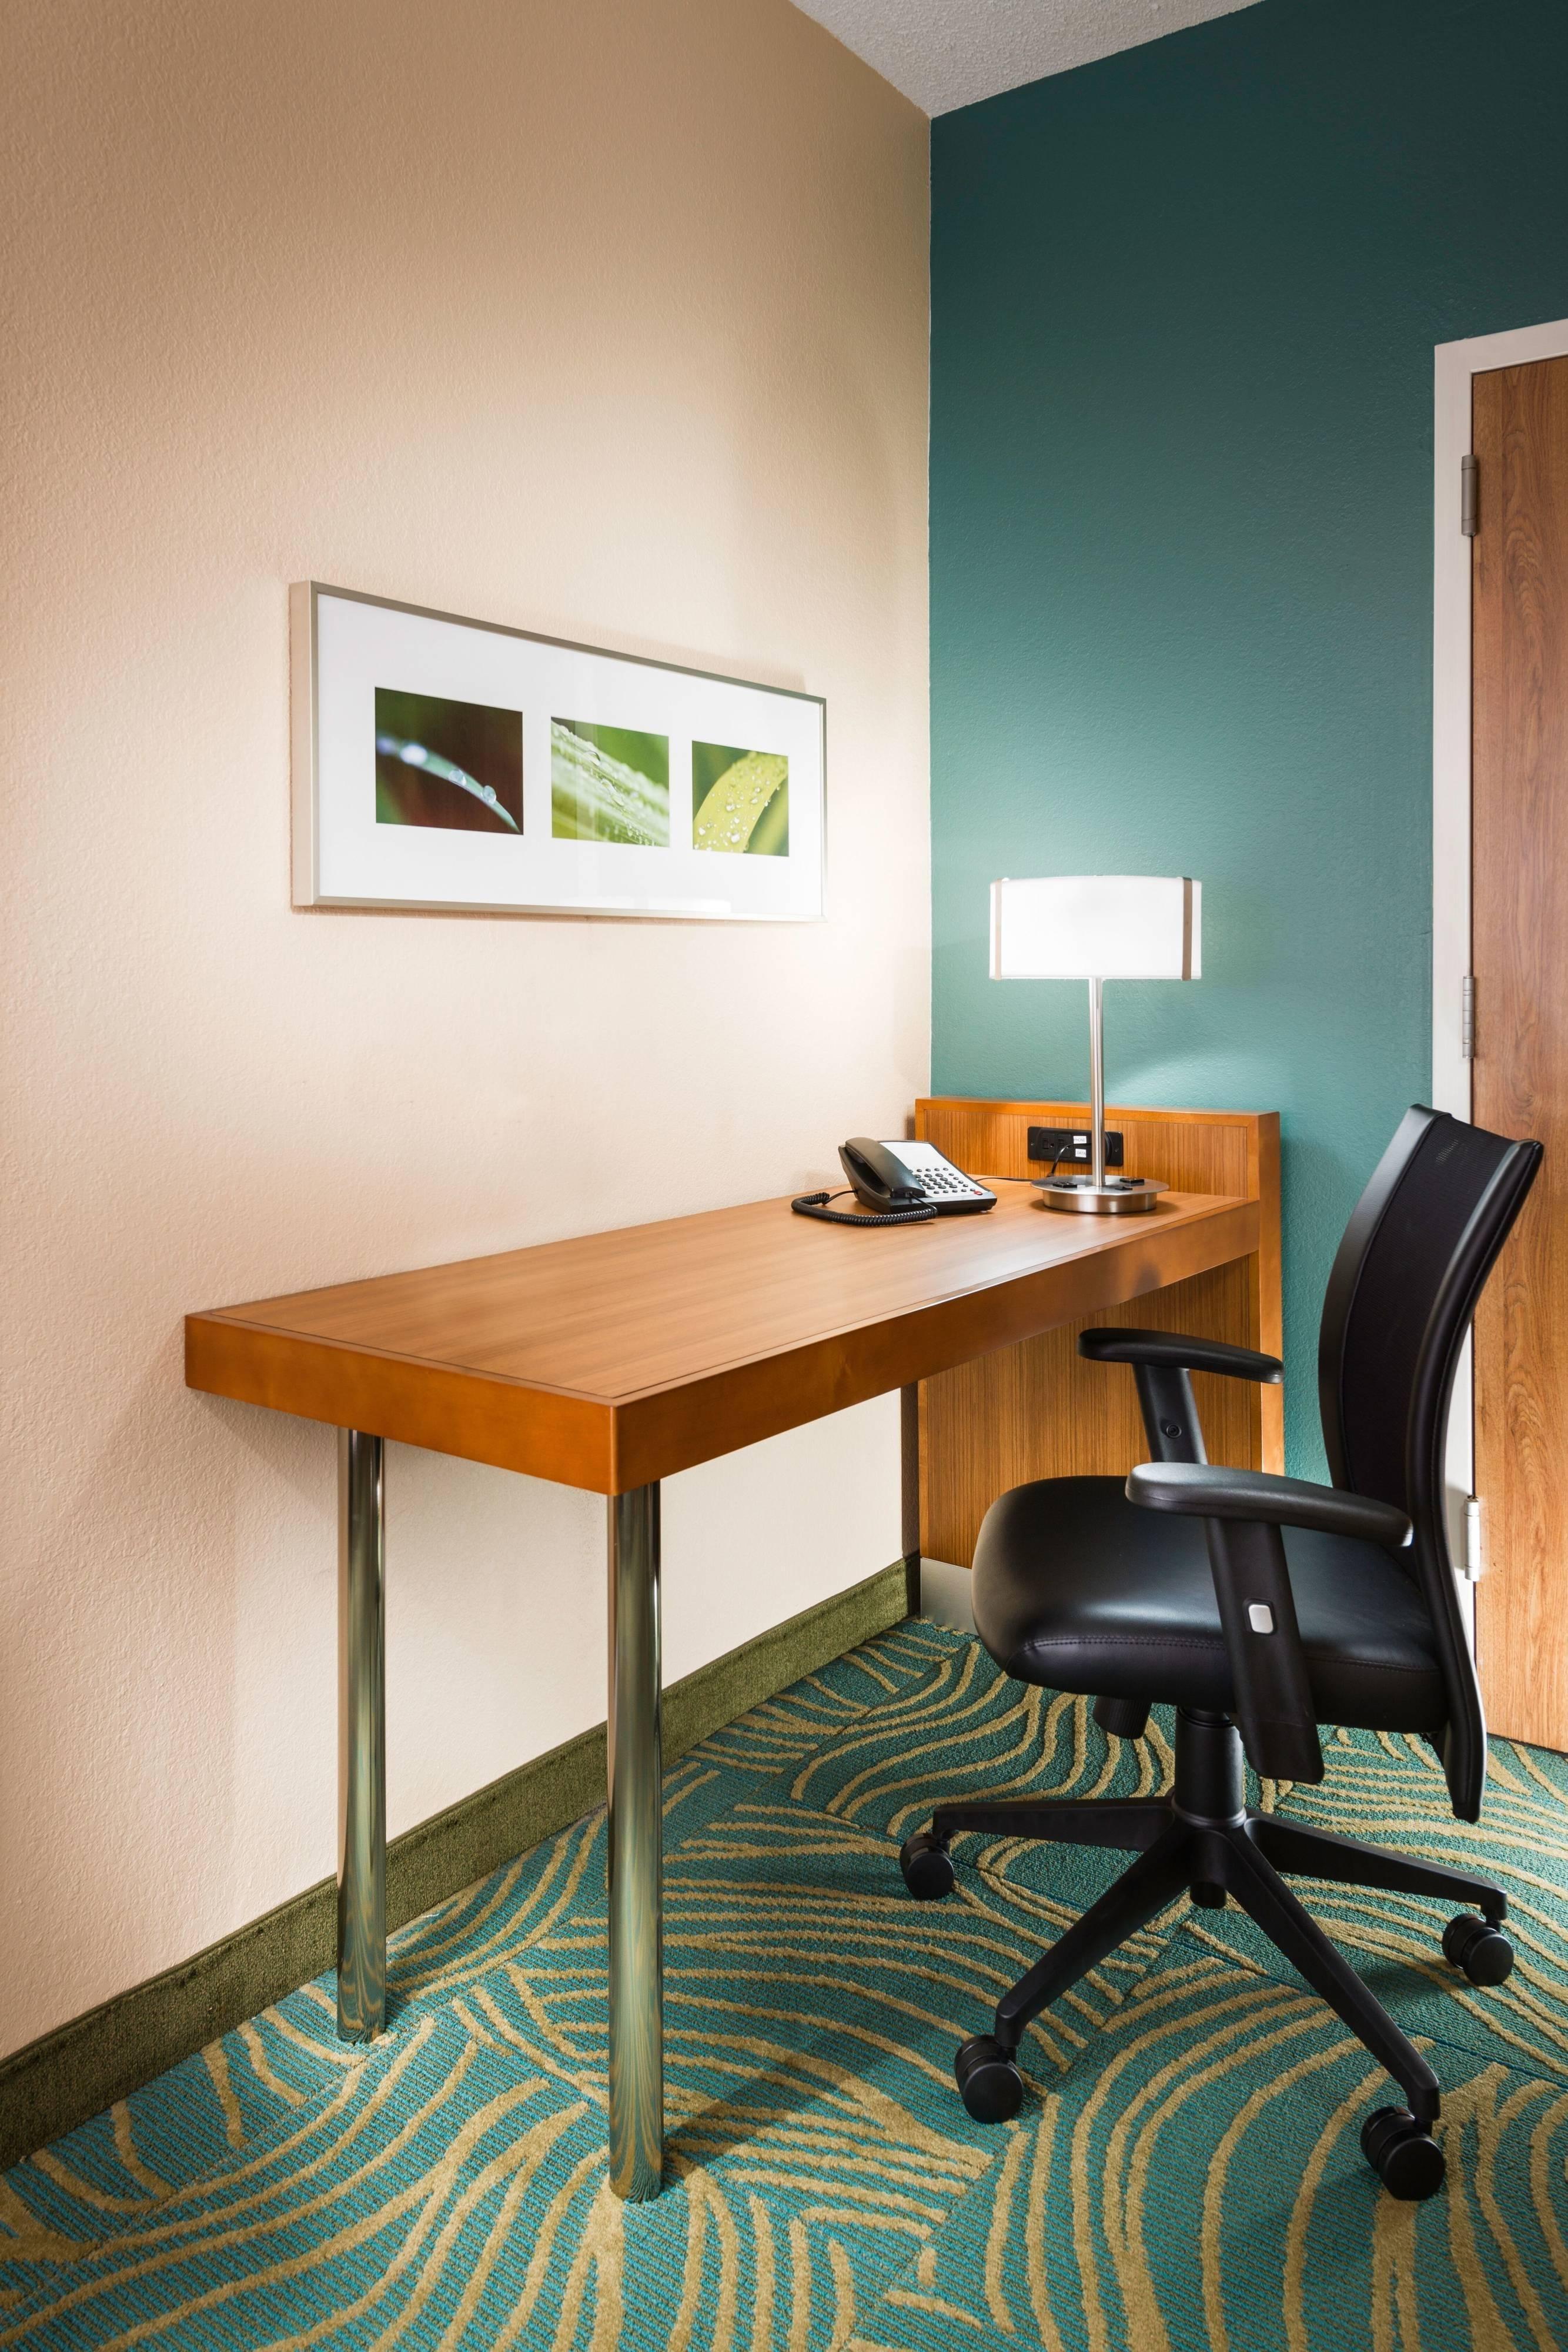 Our guest rooms offer a new desk area great for catching up on work projects.